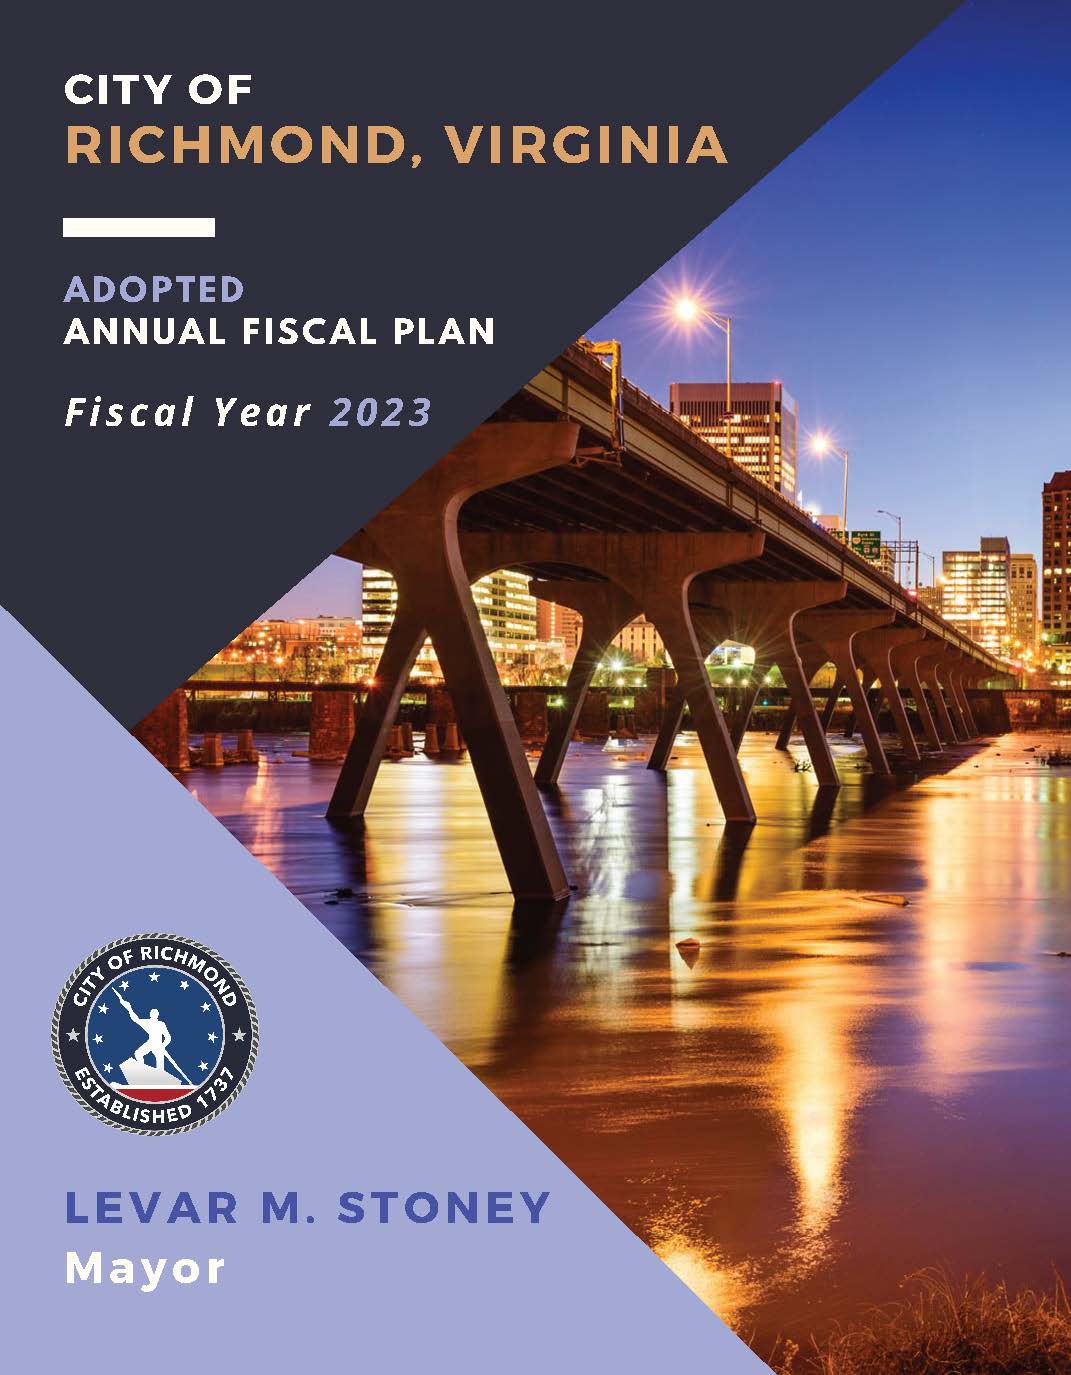 Proposed Annual Fiscal Plan for Fiscal Year 2023